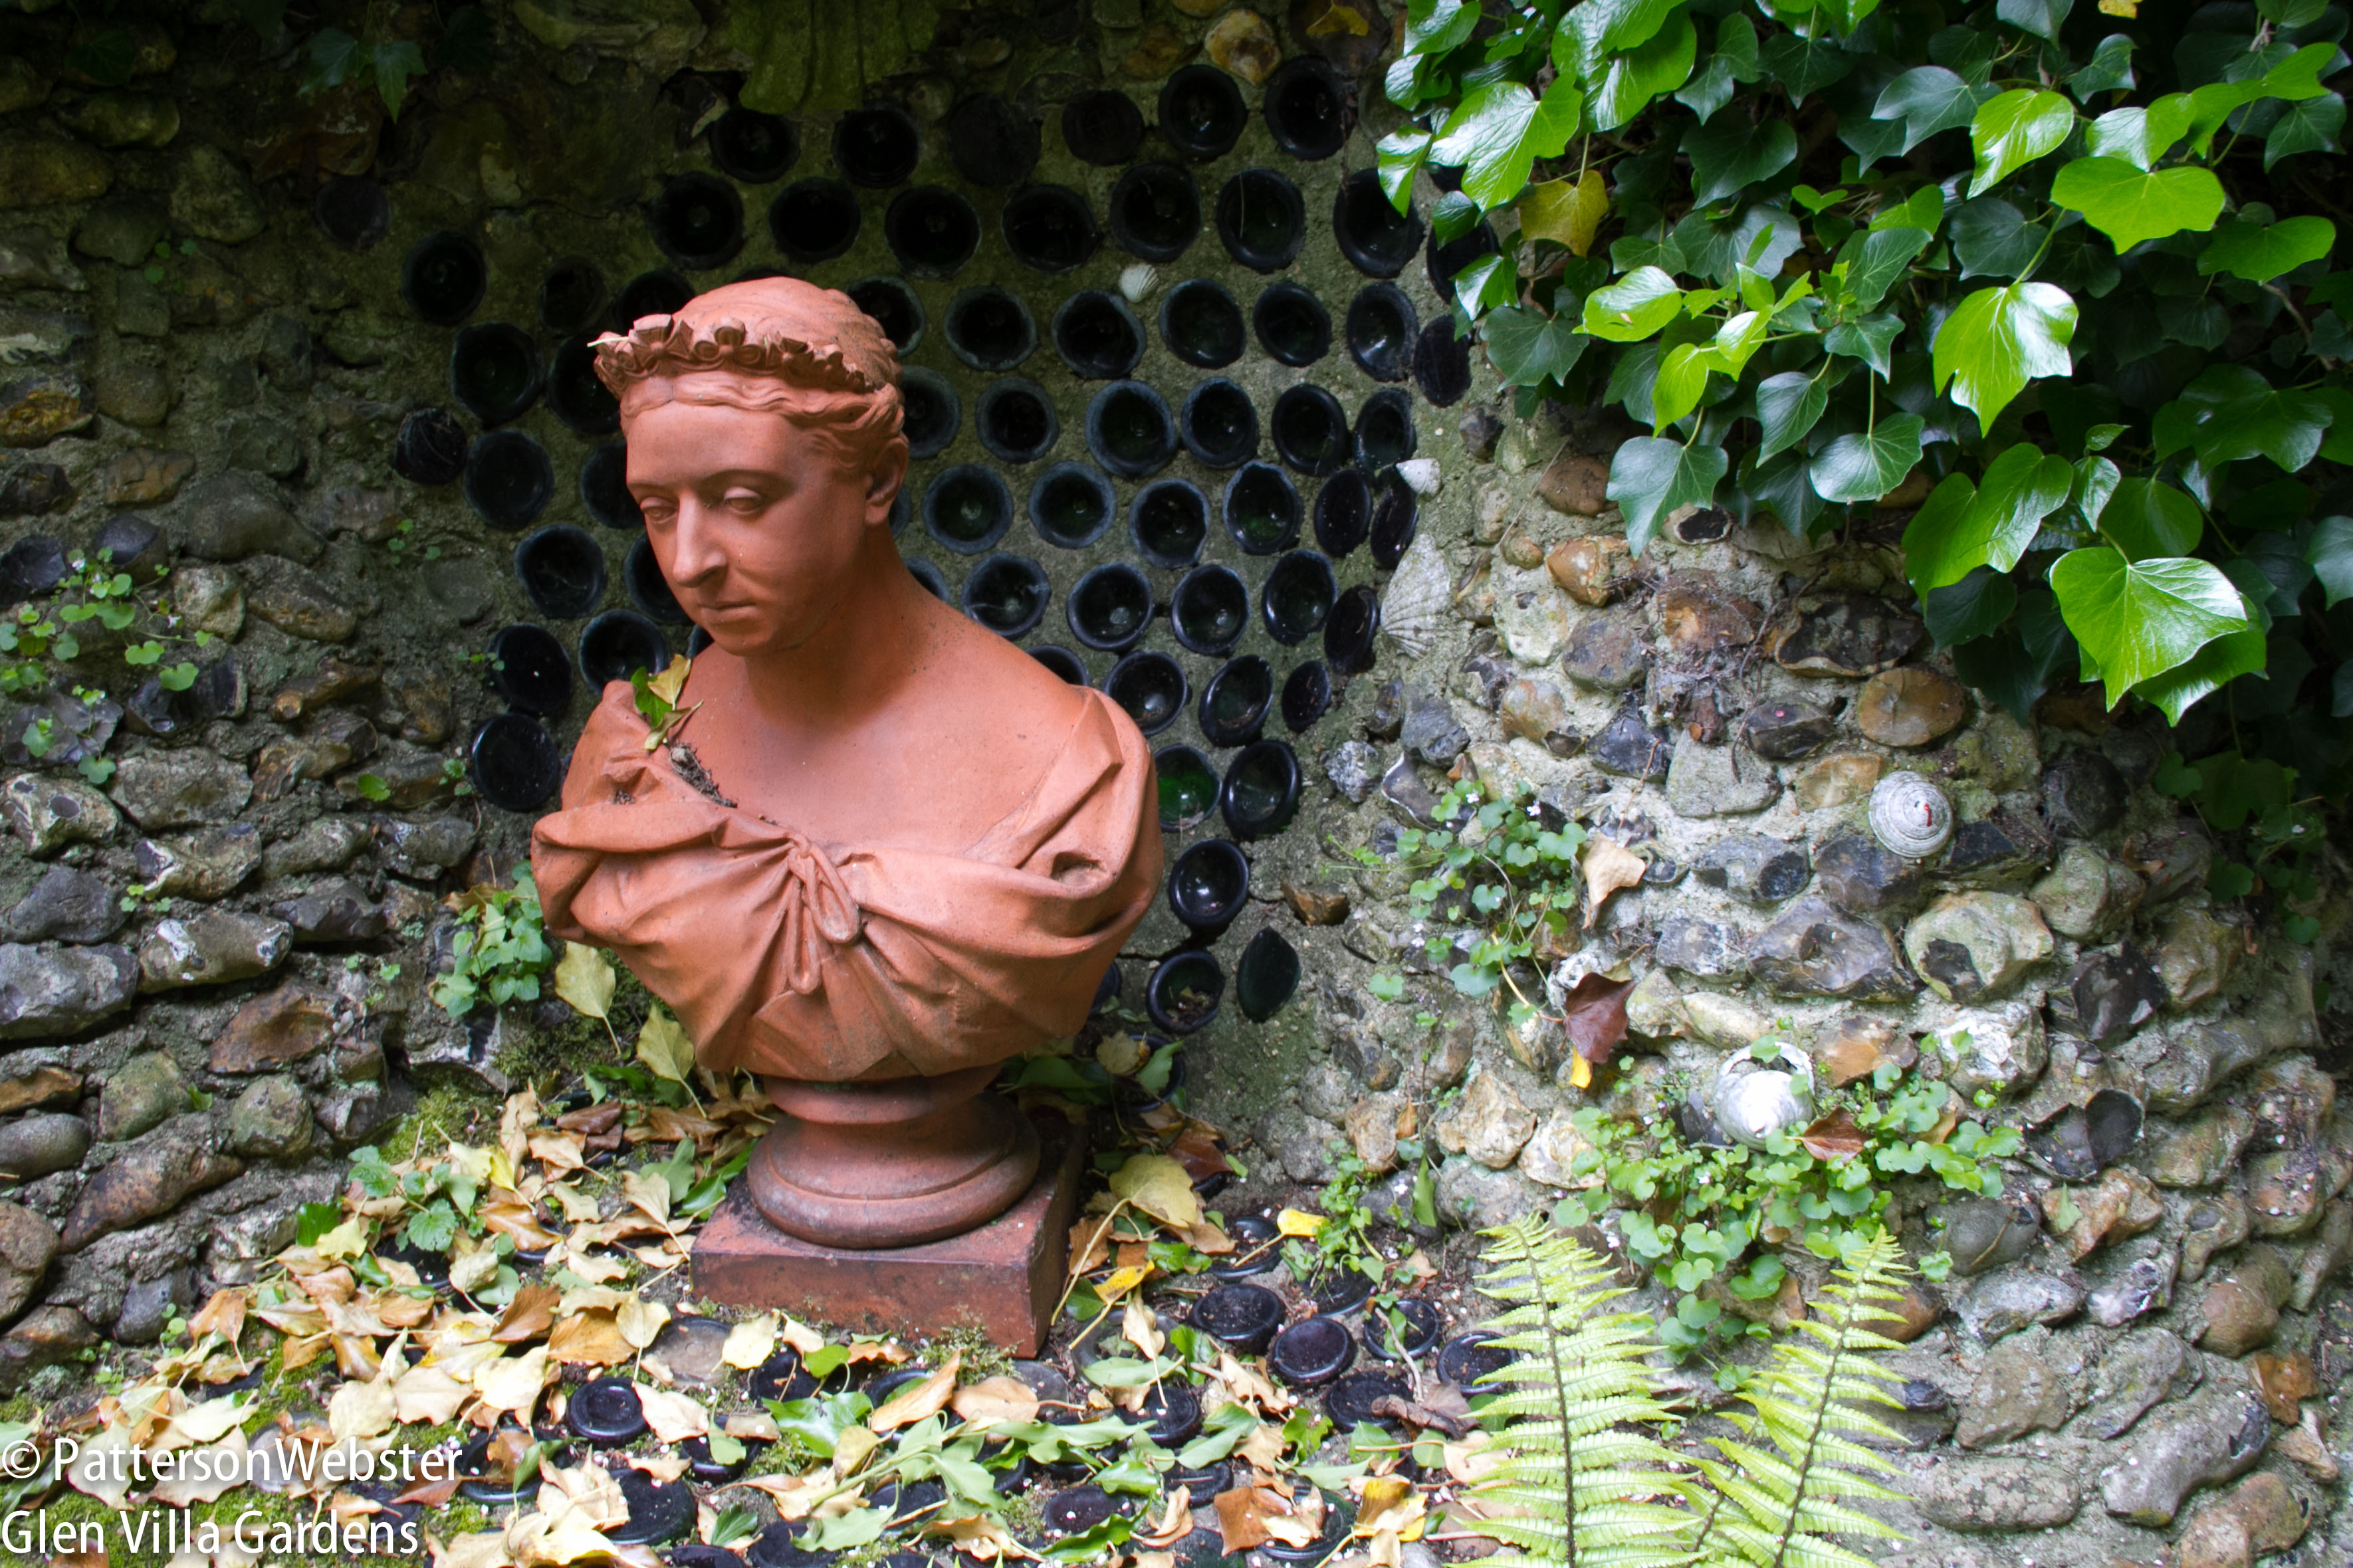 Recycled wine bottles provide a shiny backdrop to a bust of Queen Victoria at the Gibberd Garden. Does this constitute using the old with the new? 